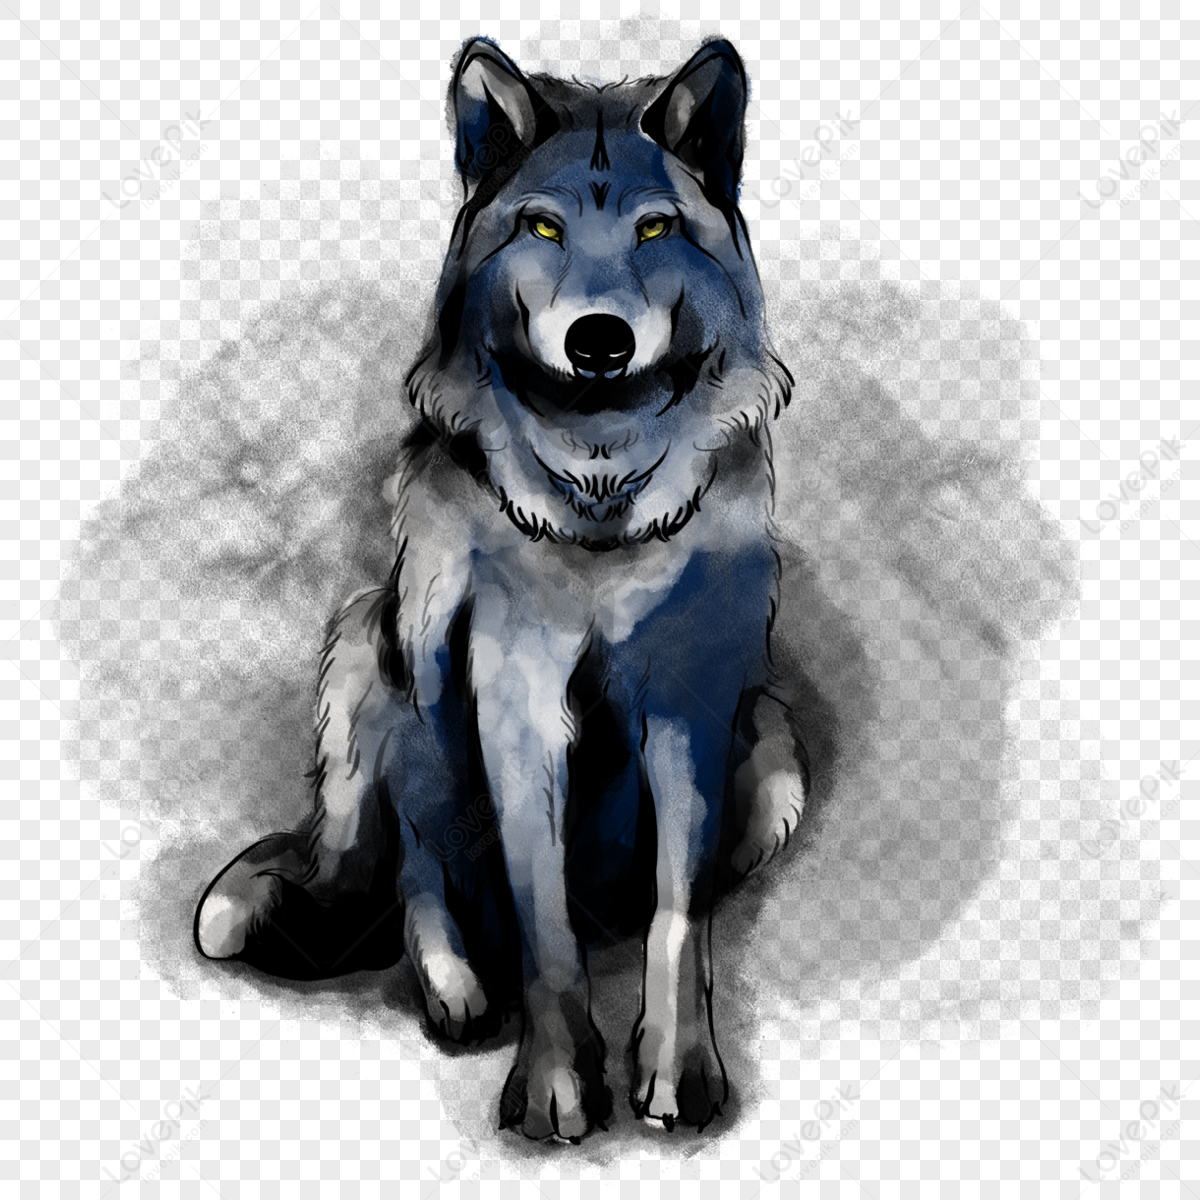 Blue hand painted watercolor animal wolf,blue animals,anime png hd transparent image